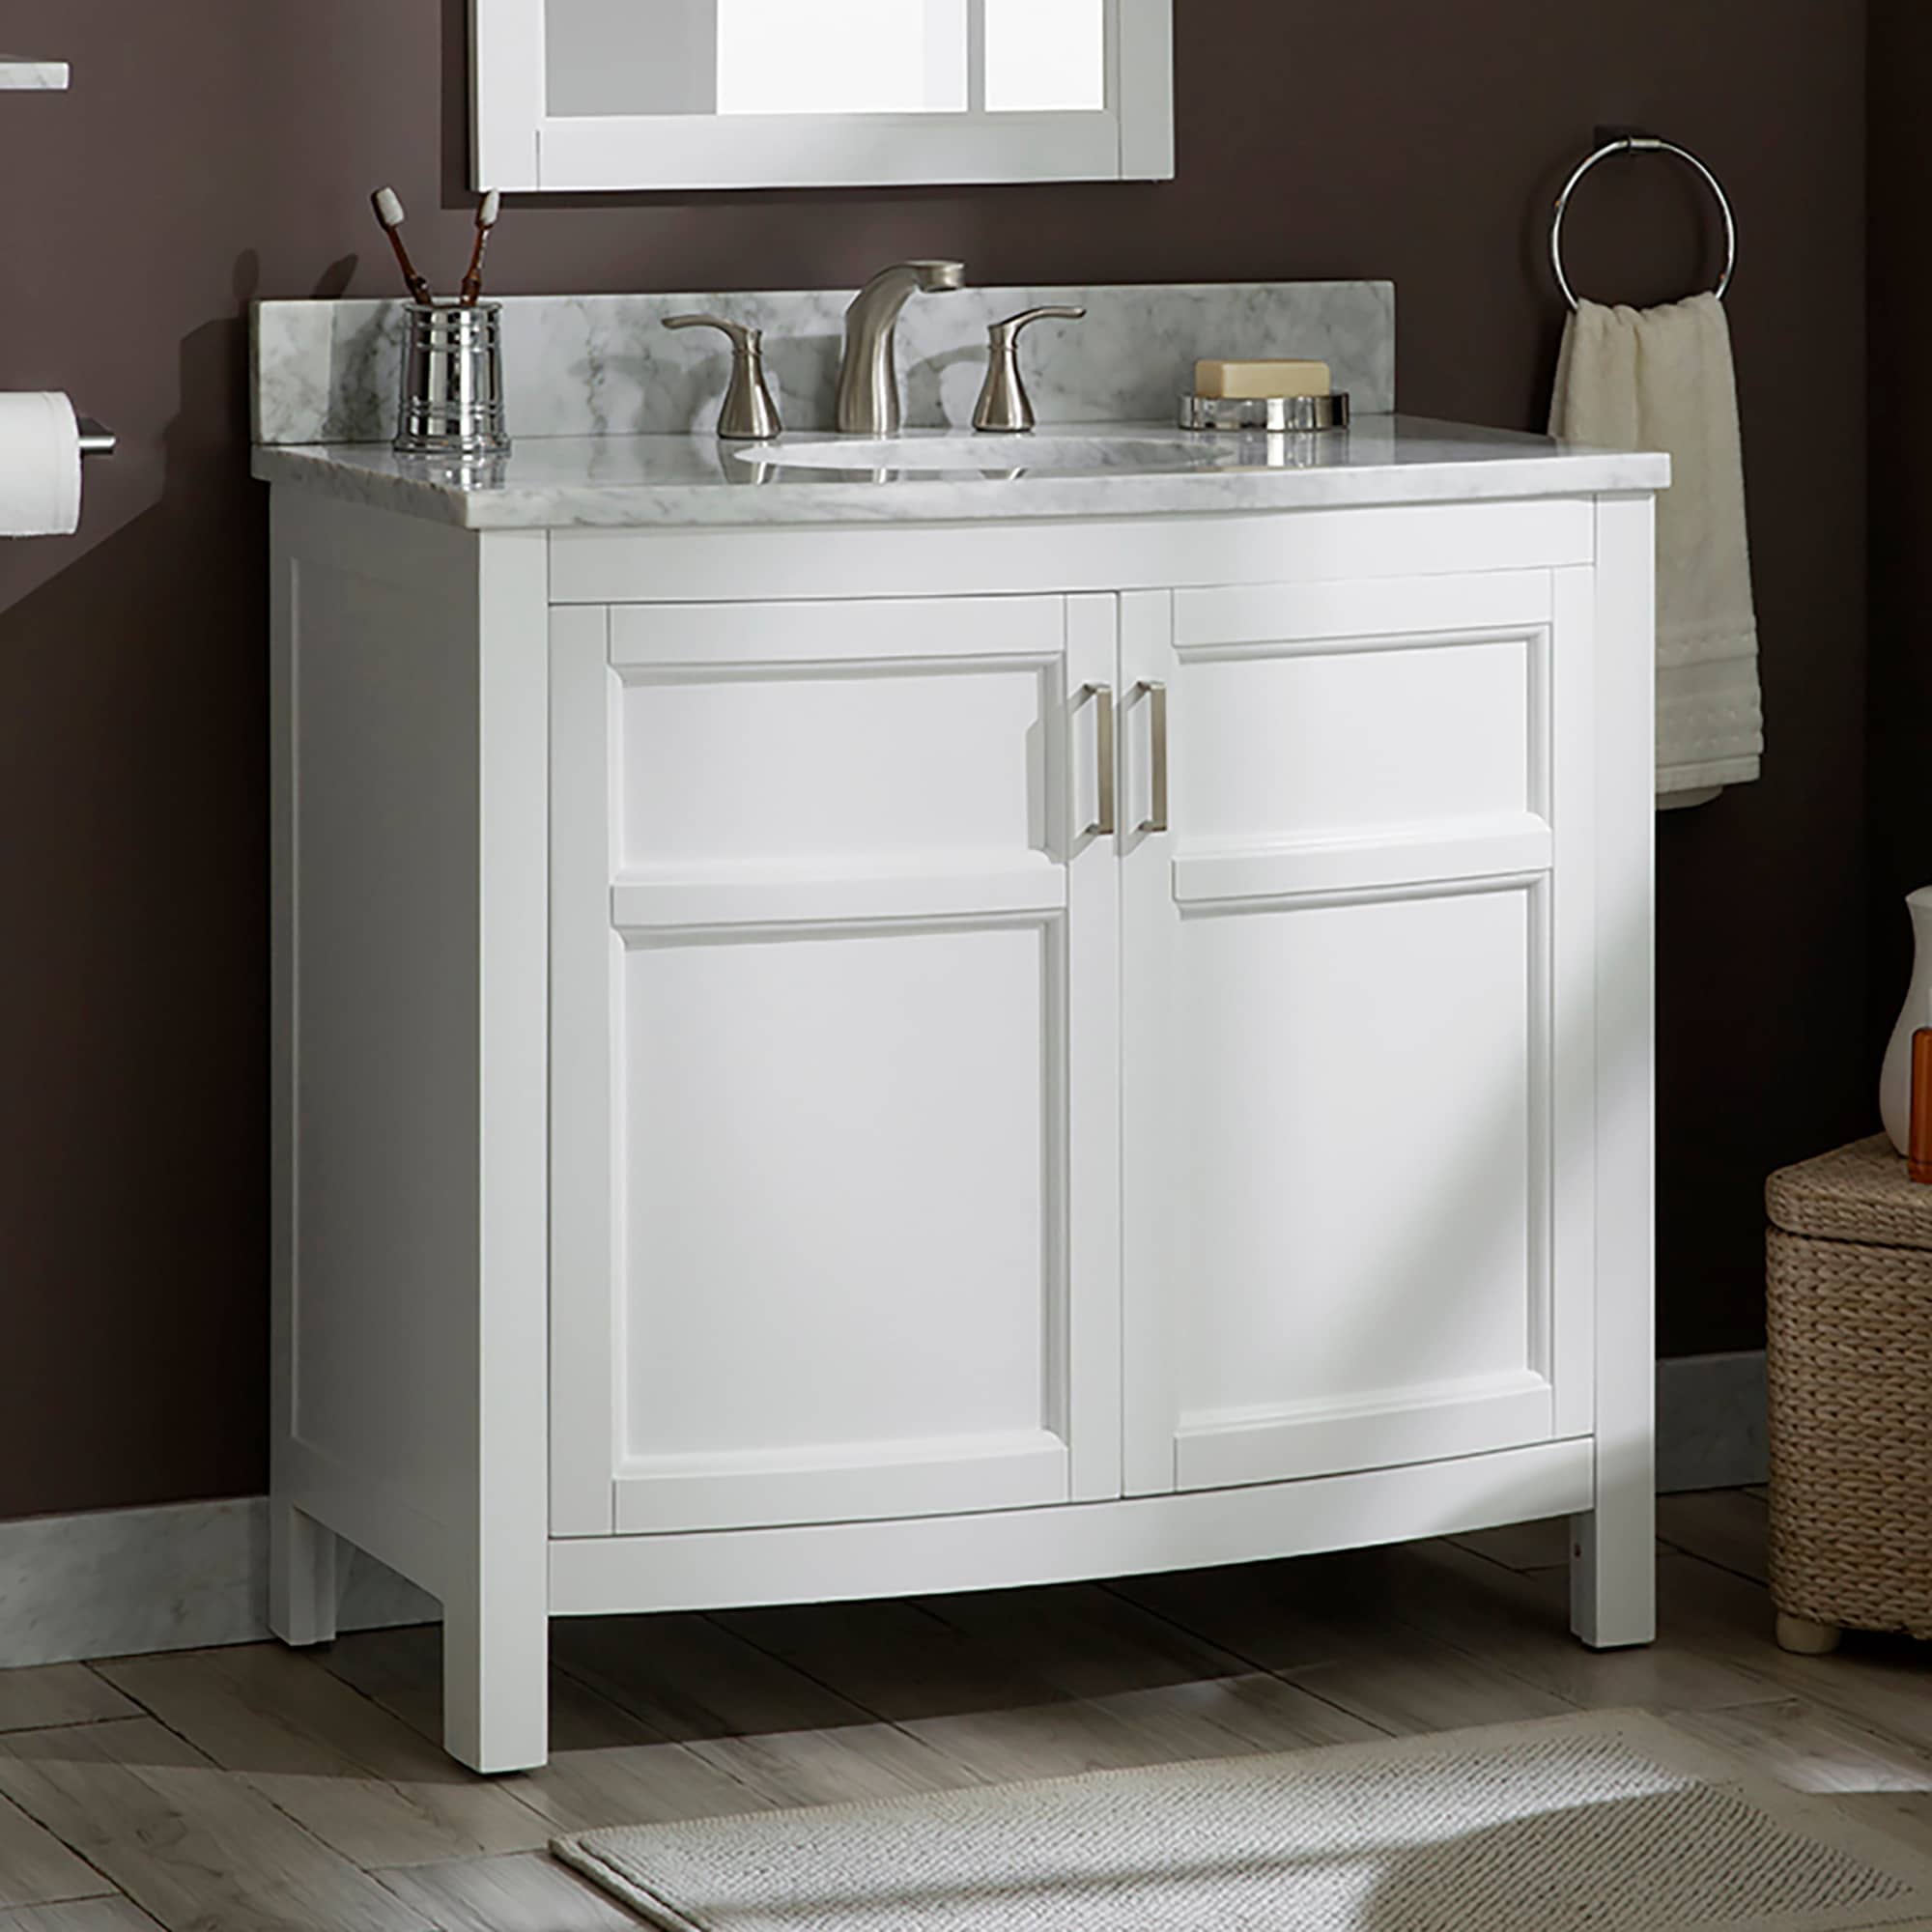 allen + roth Moravia Bathroom Vanities with Tops at Lowes.com